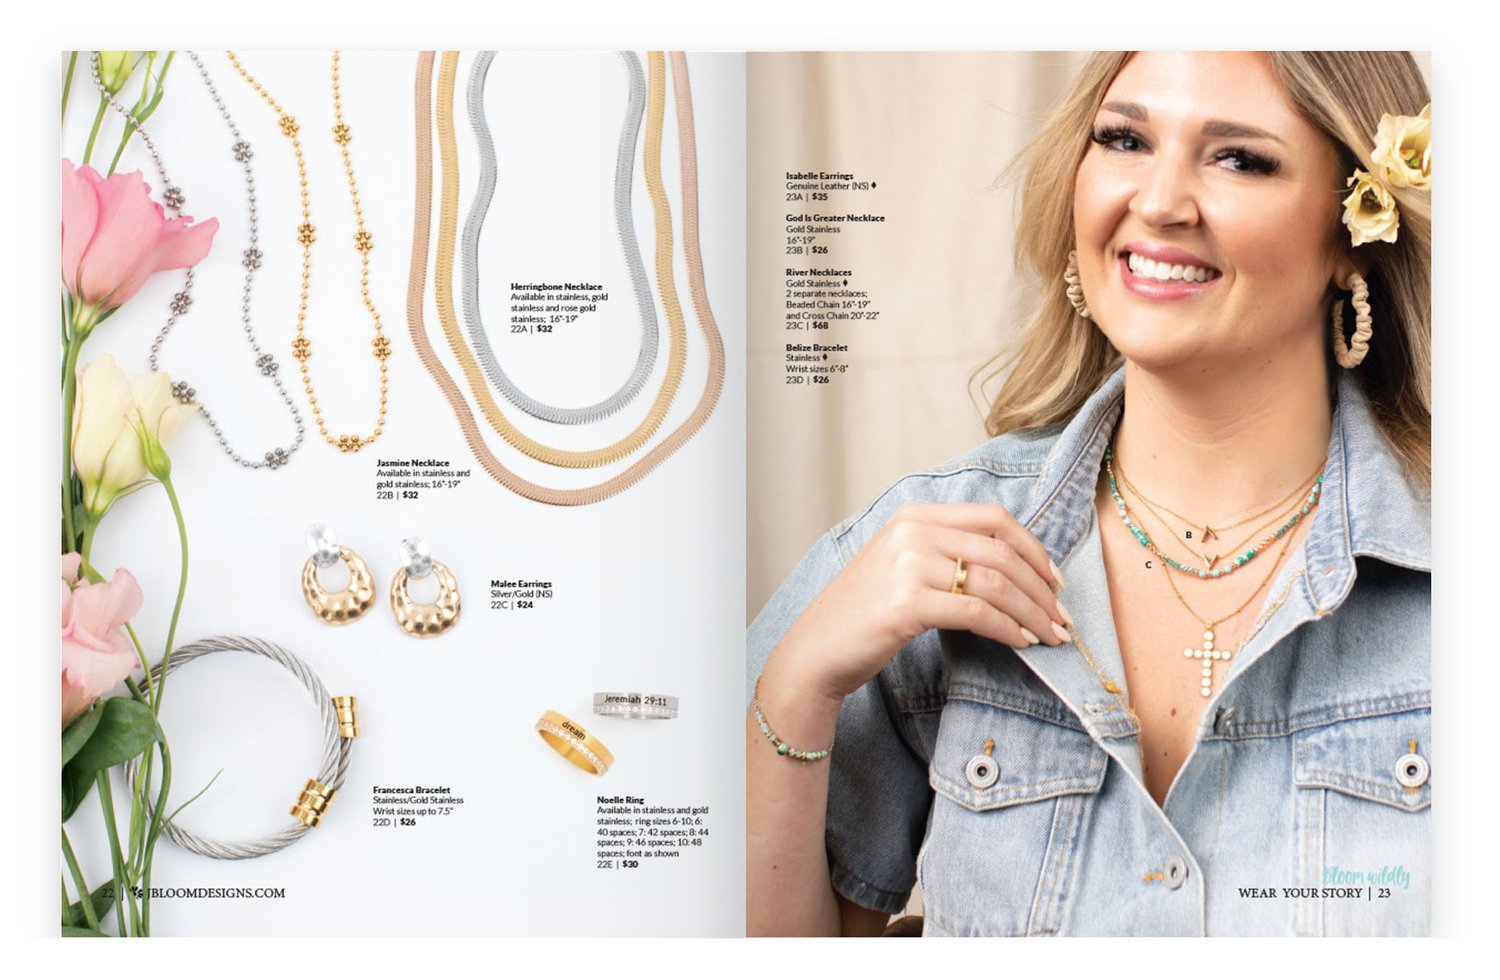 Permanent Jewelry Archives - Page 6 of 9 - JBloom Designs